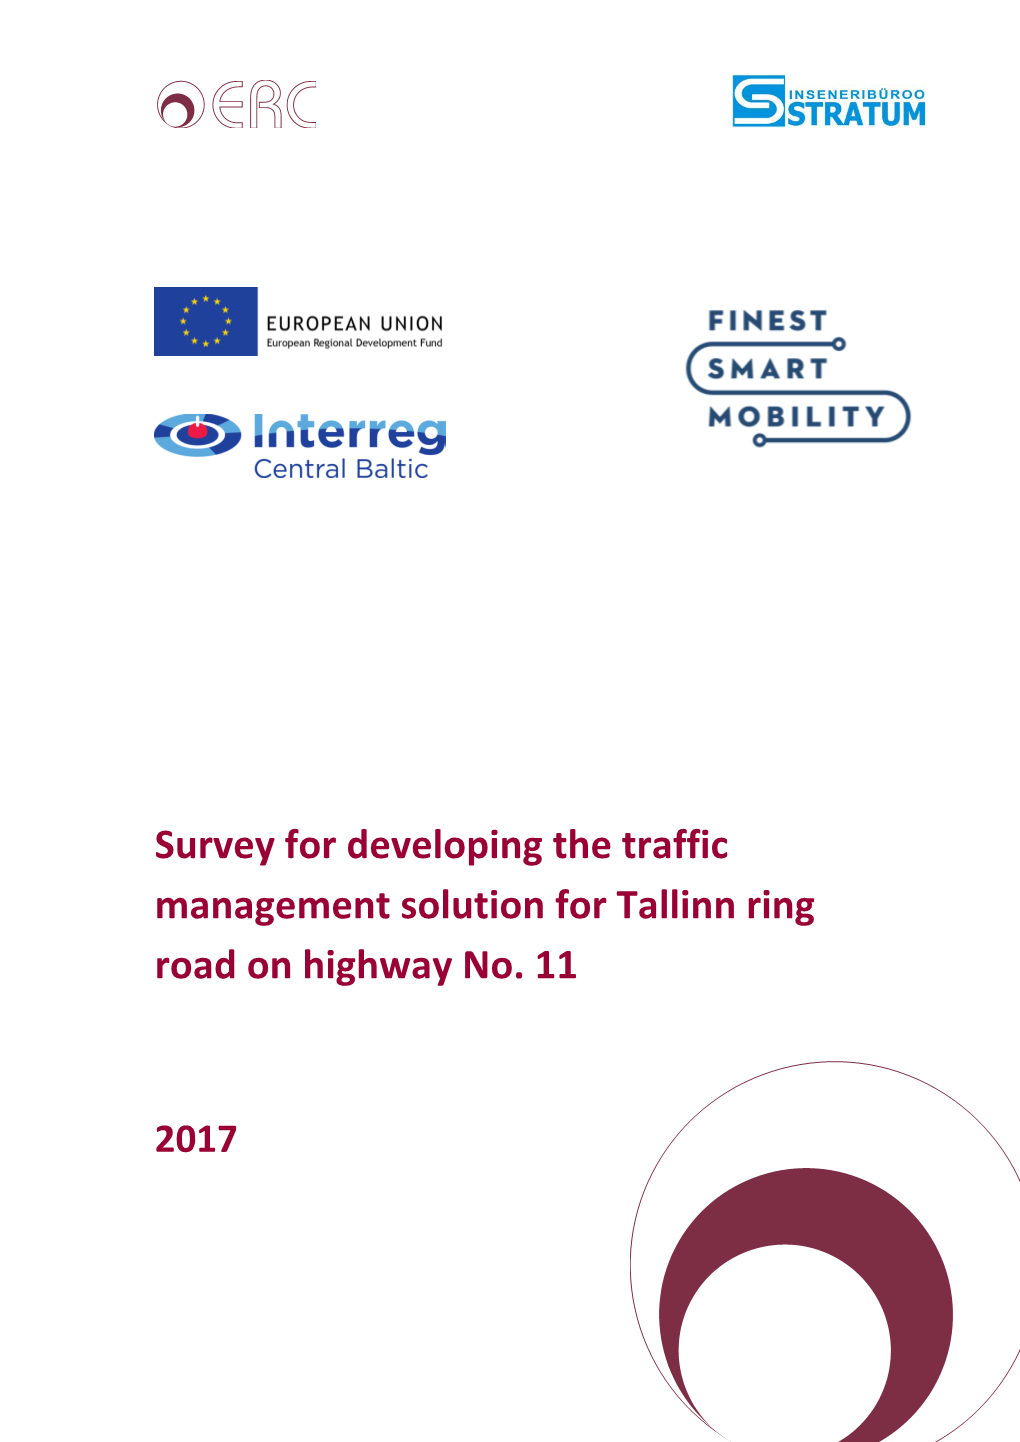 Survey for Developing the Traffic Management Solution for Tallinn Ring Road on Highway No